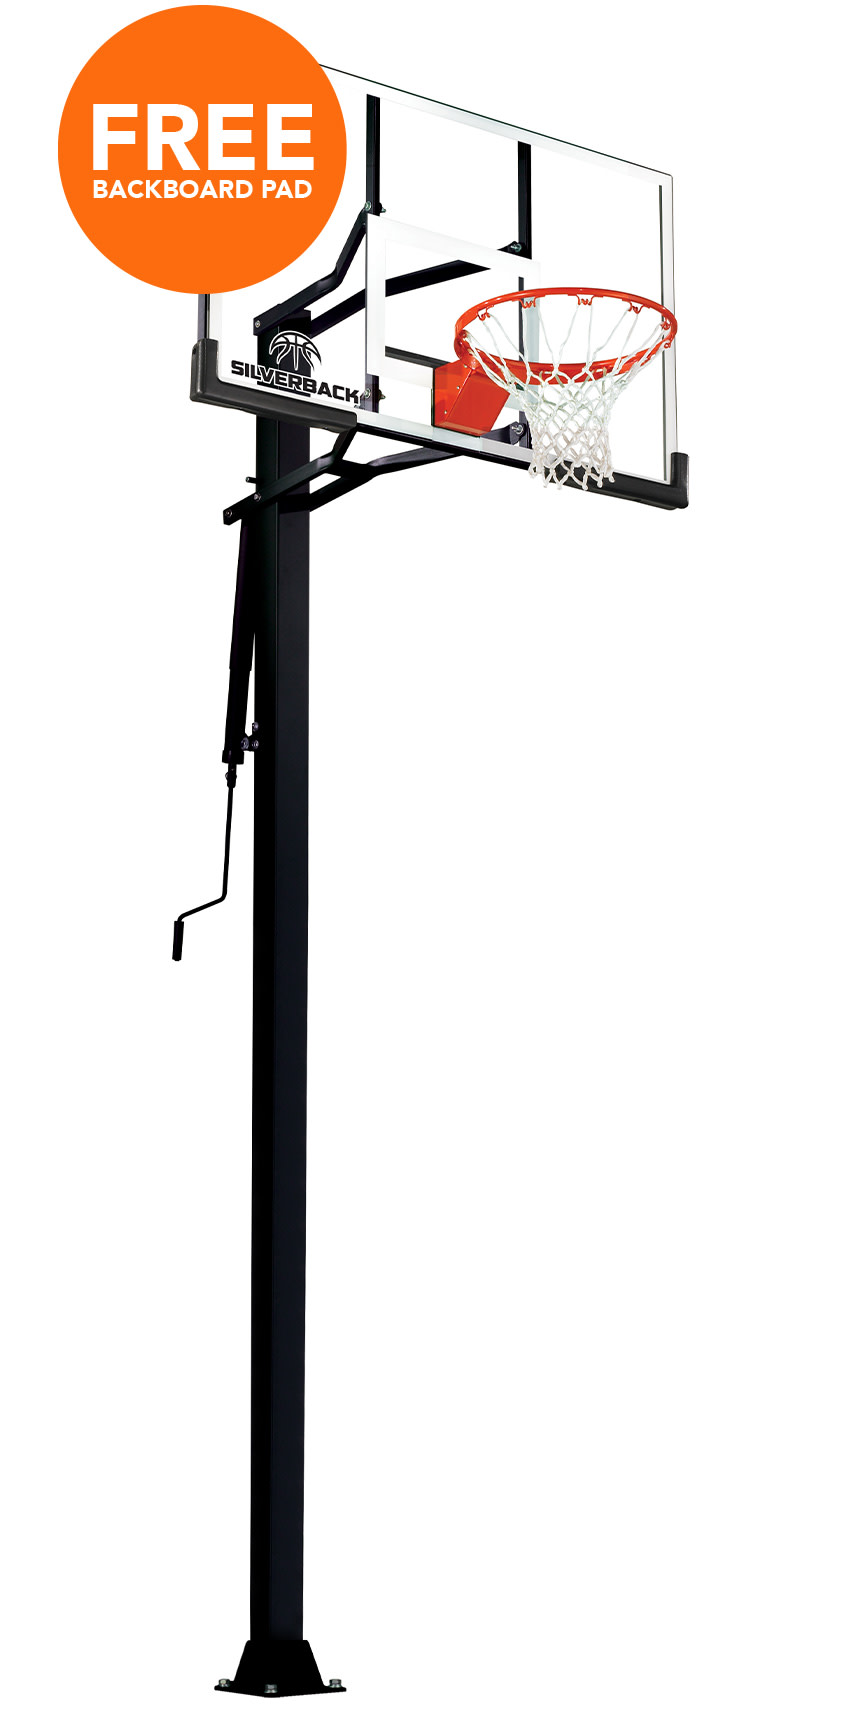 Silverback 54" In-Ground Height-Adjustable Basketball System with Tempered Glass Backboard, Anchor Mounting, and 5-year Limited Warranty - image 1 of 9